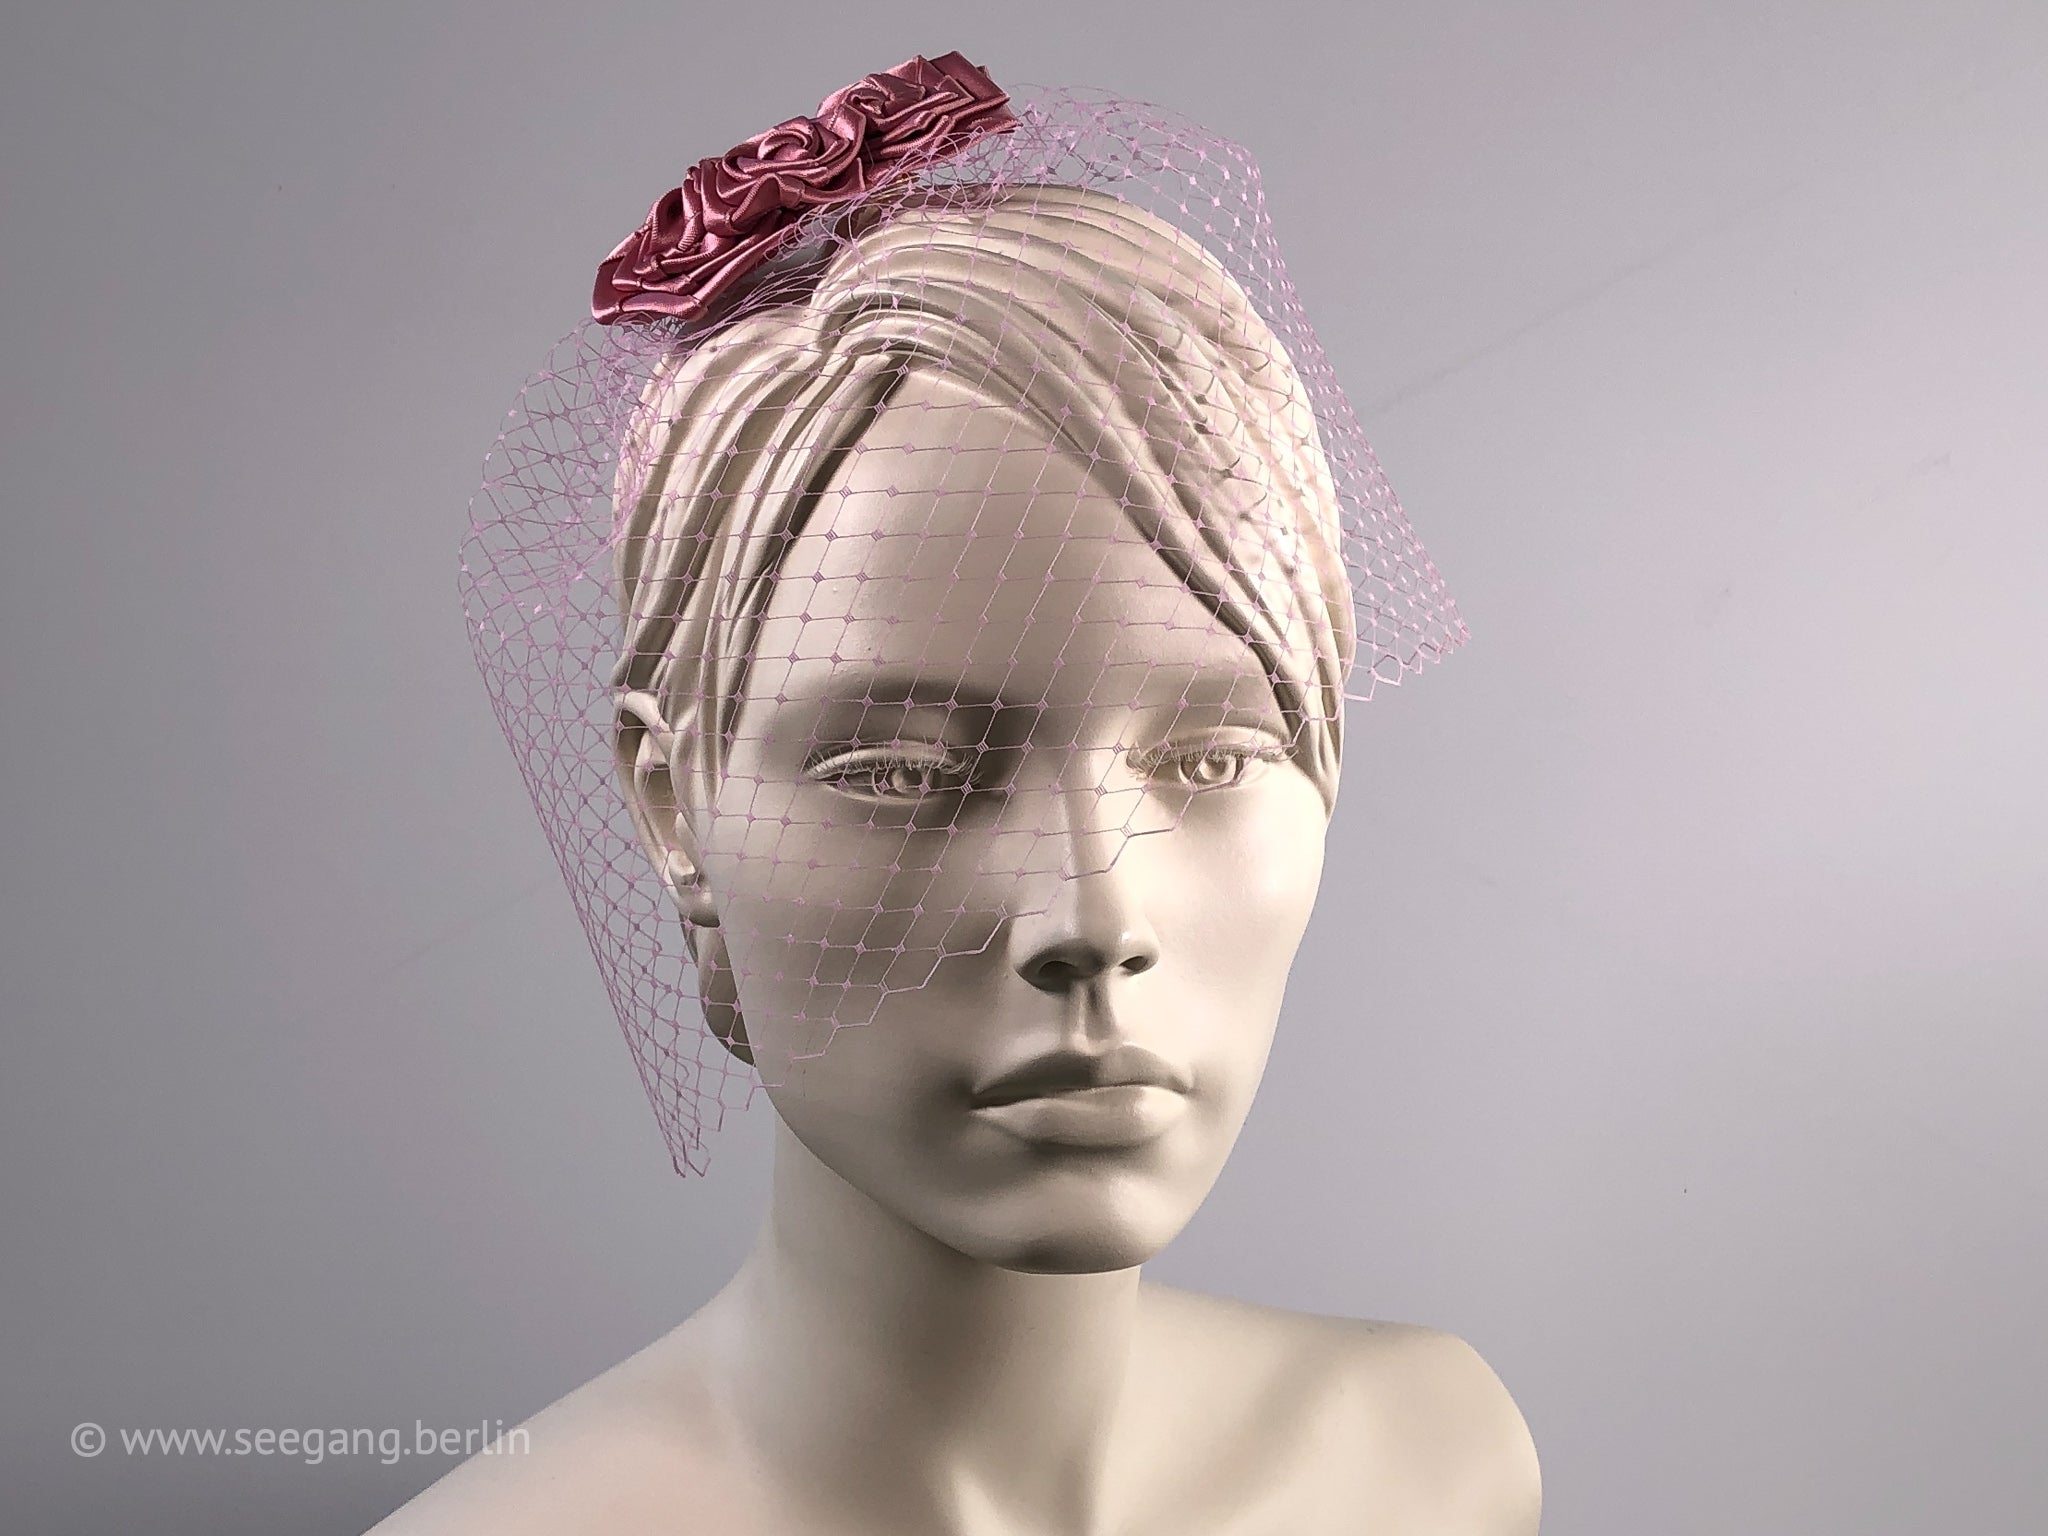 BIRDCAGE - VEIL HEADDRESS WITH ROSES IN CARDINAL VALENTINES RED